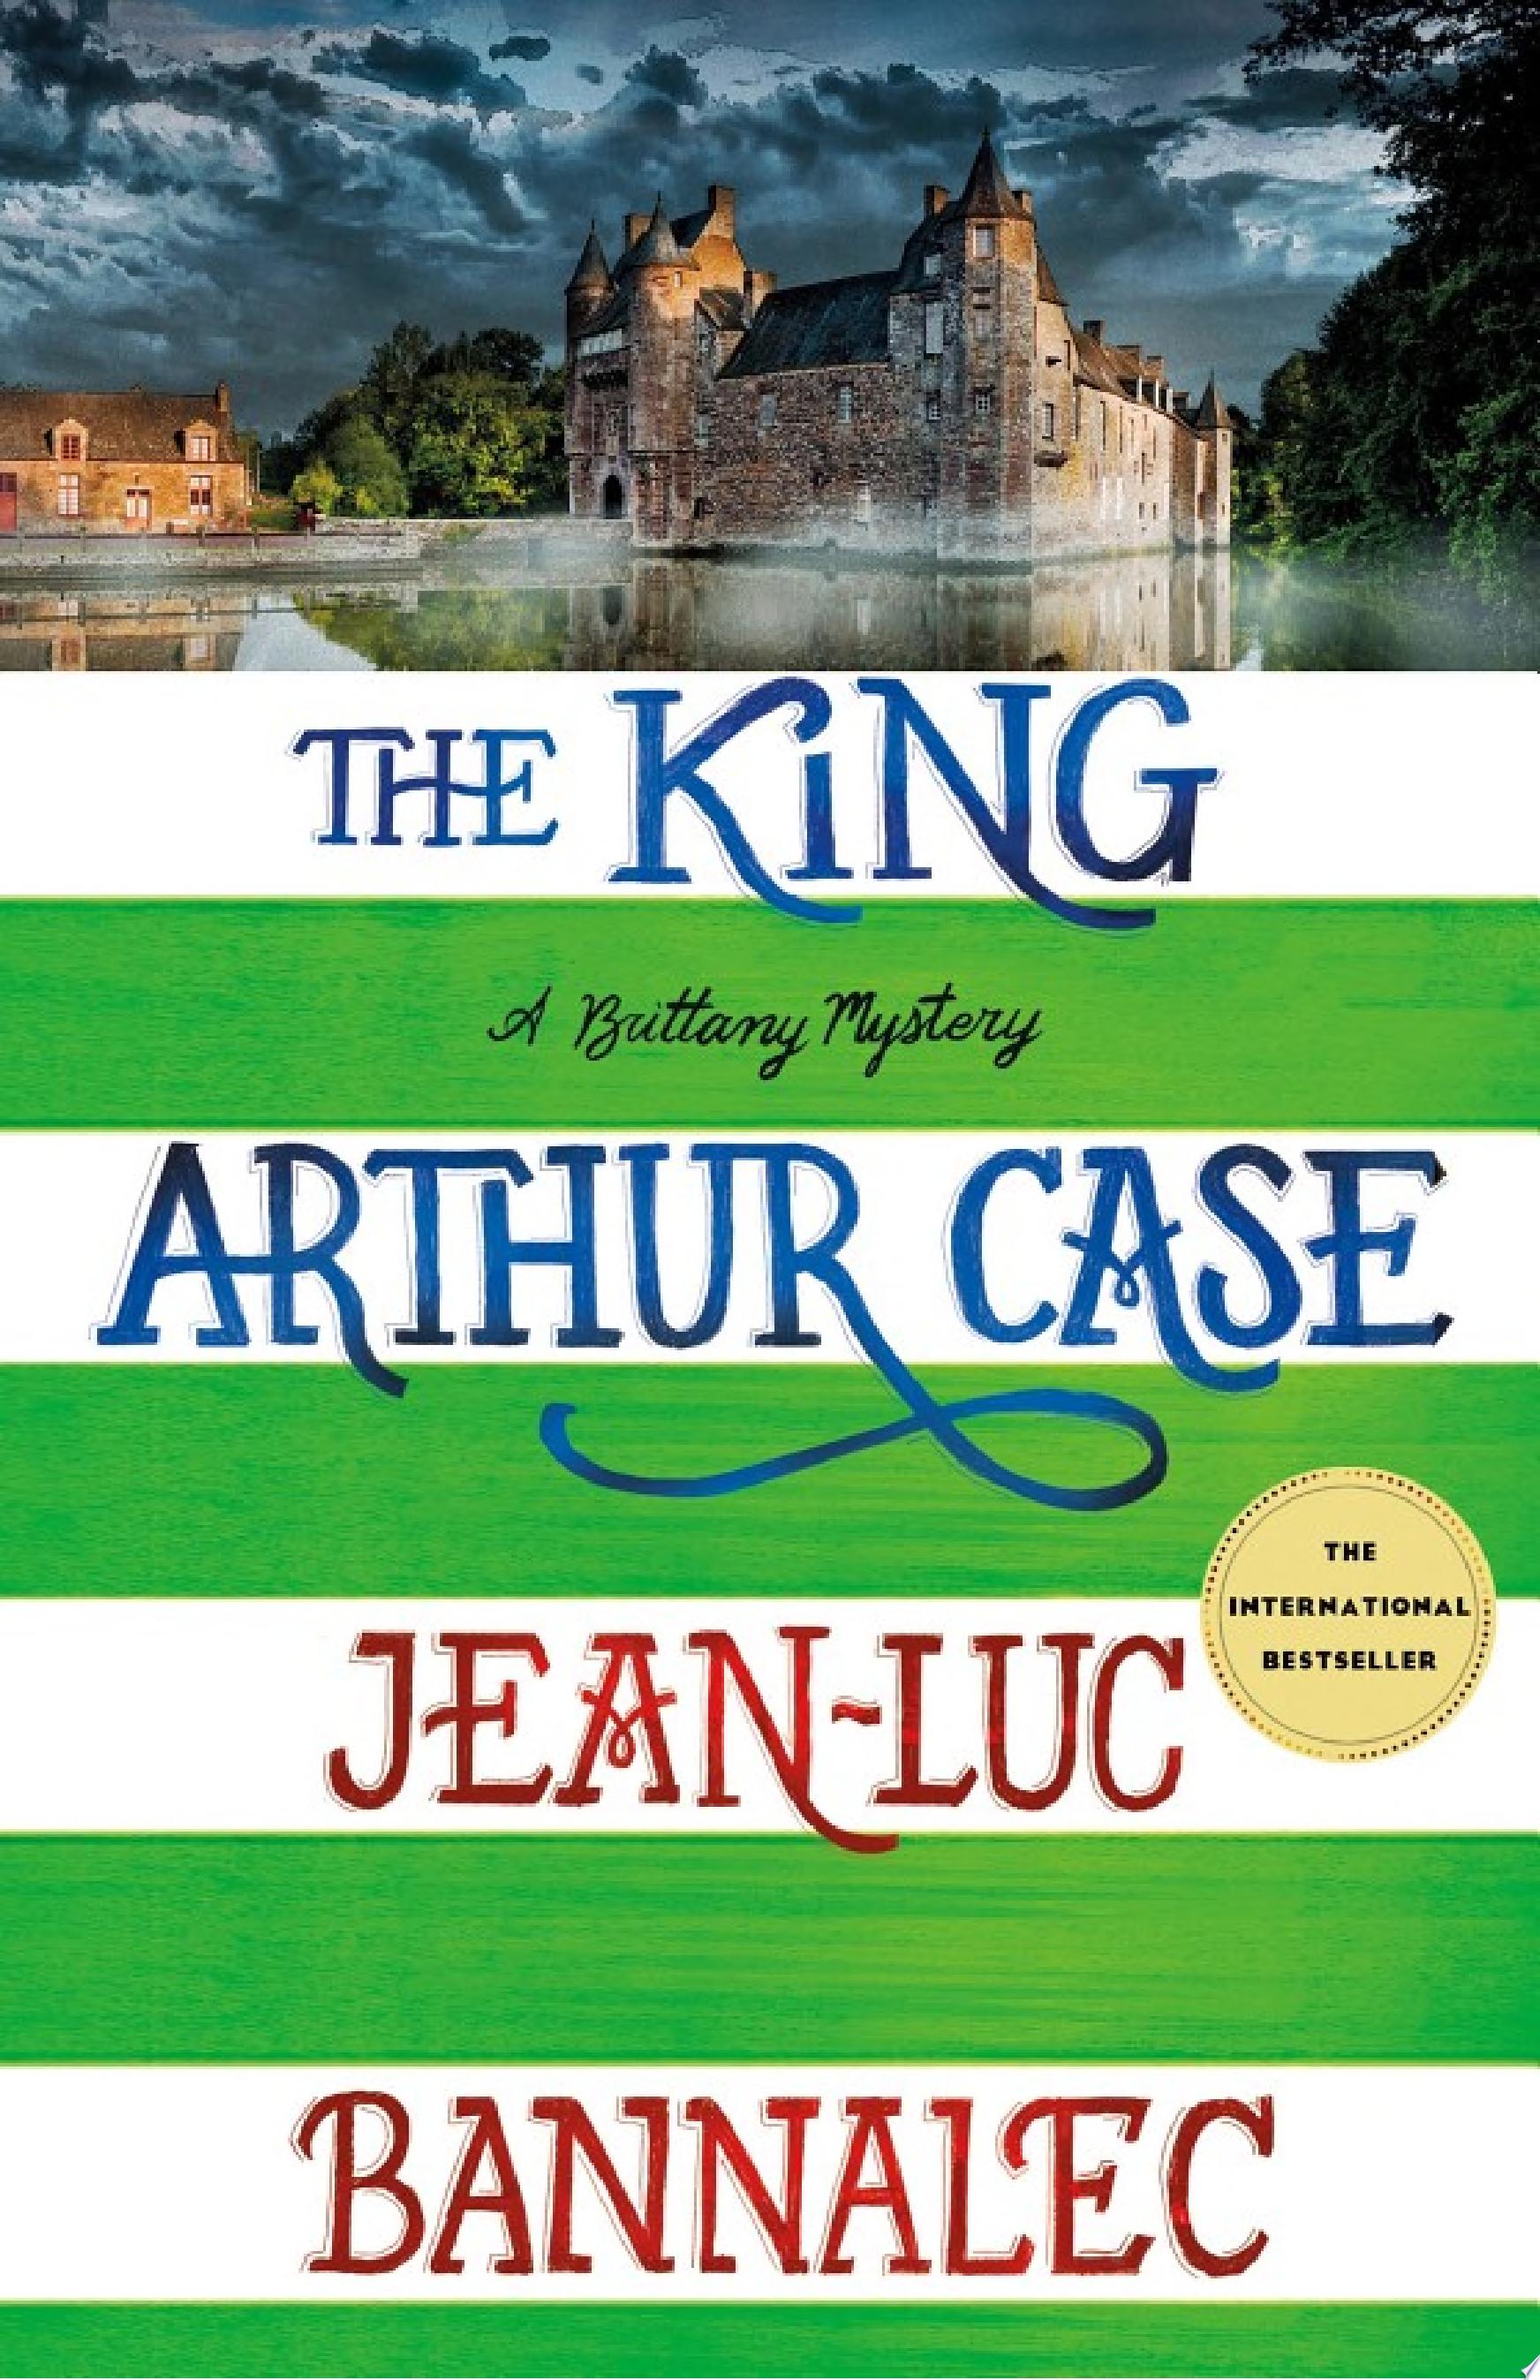 Image for "The King Arthur Case"